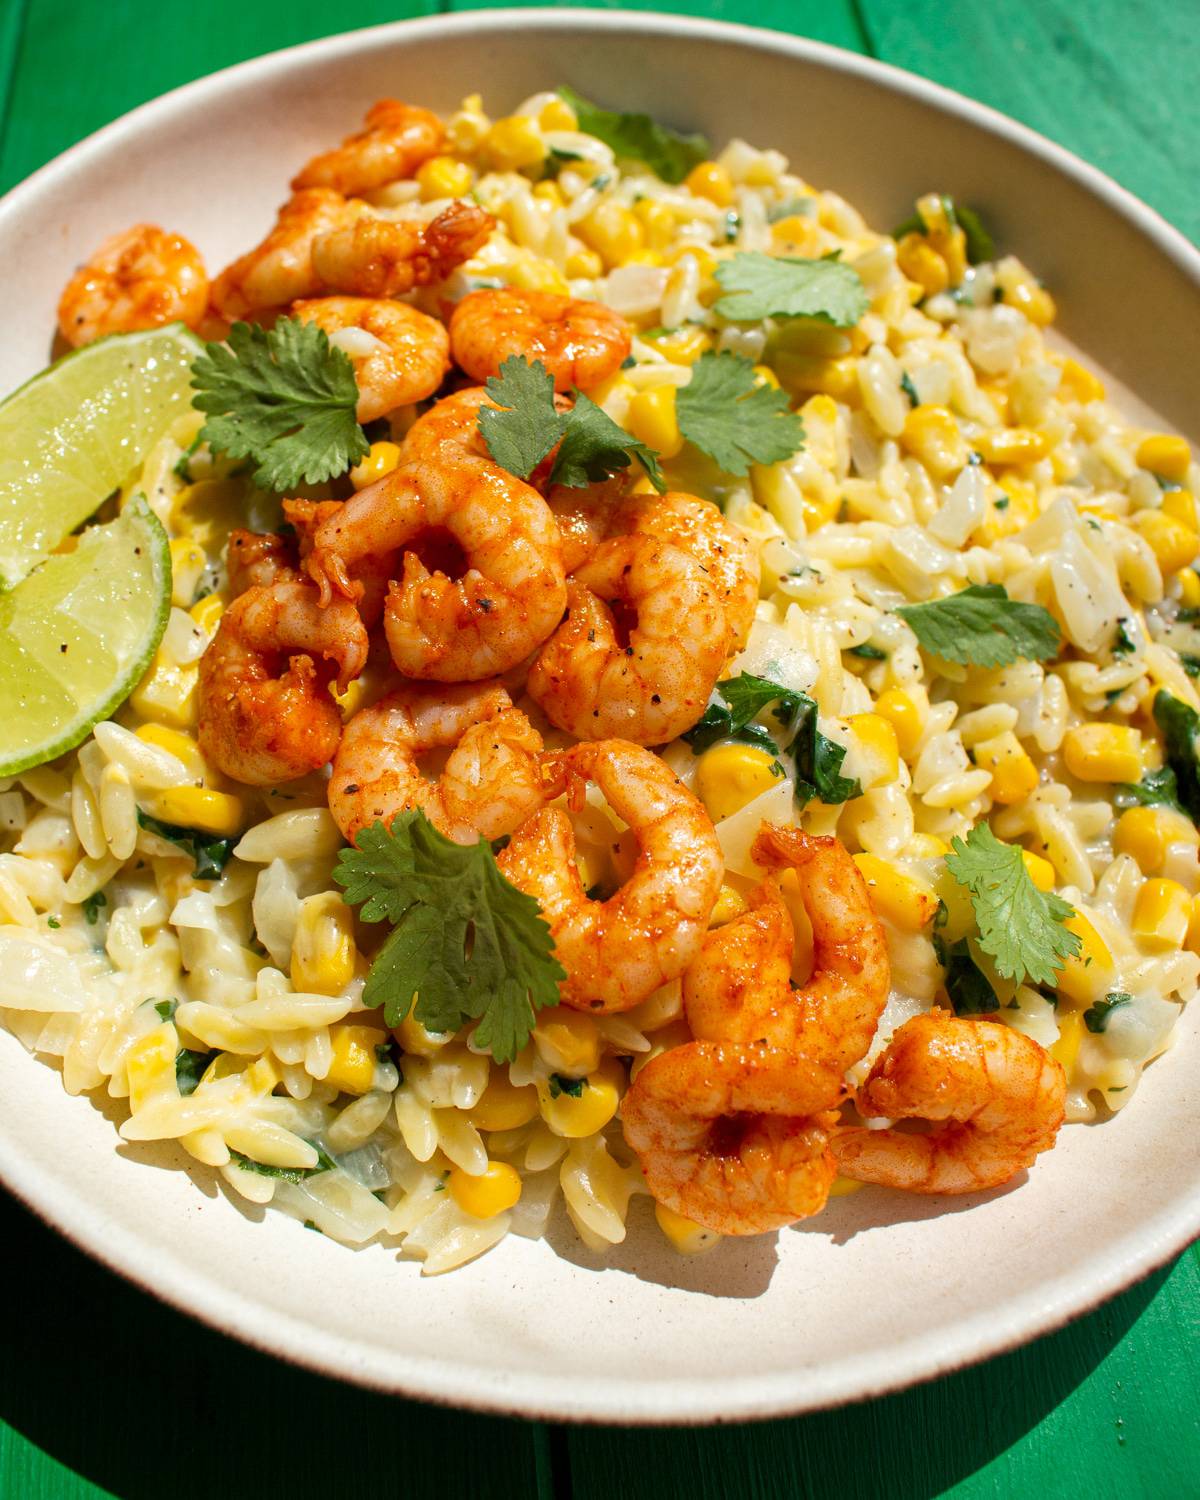 Sweetcorn and orzo topped with paprika covered prawns. Garnished with lime wedges and parsley.